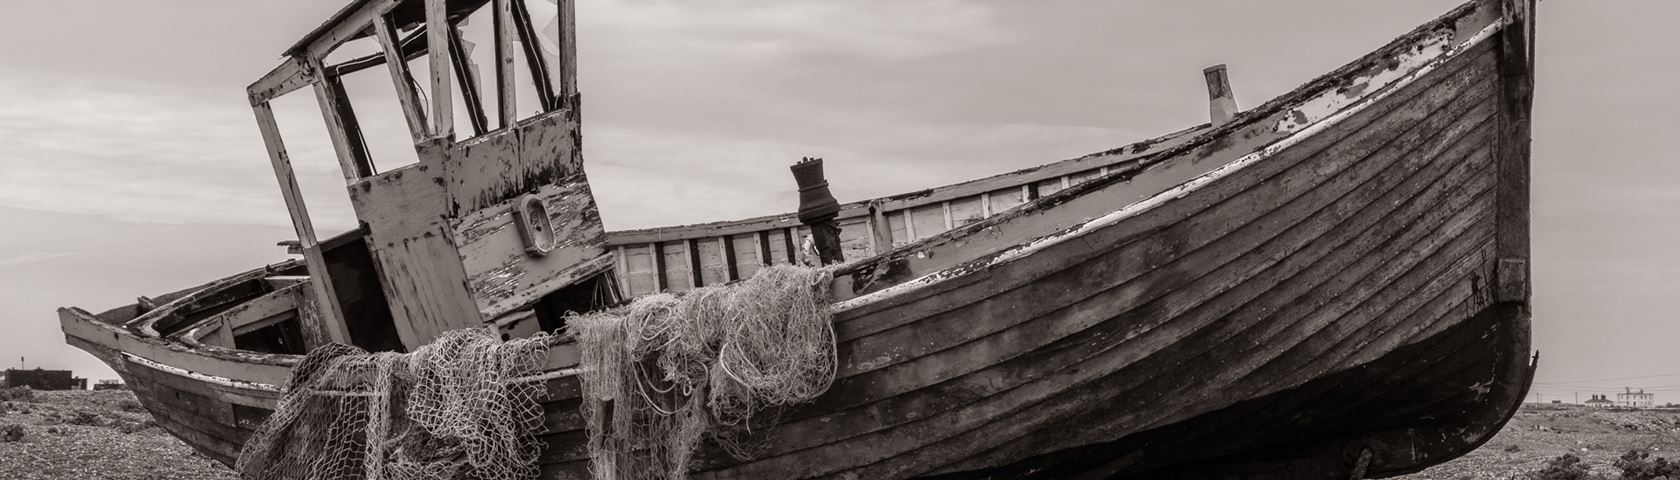 Dungeness Fishing Boat